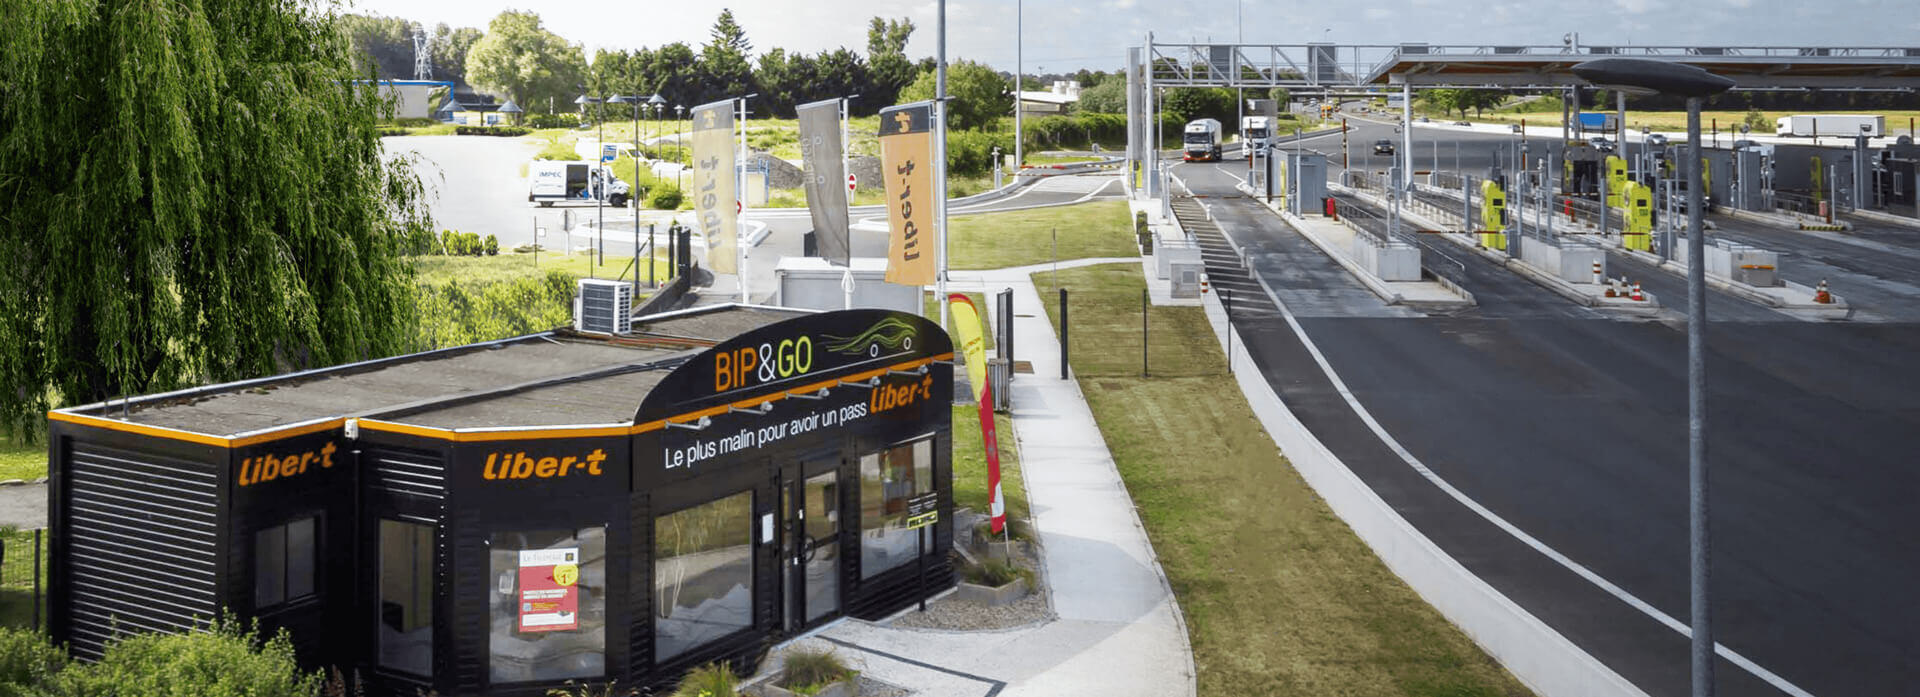 Bip&Go electronic toll payment branches